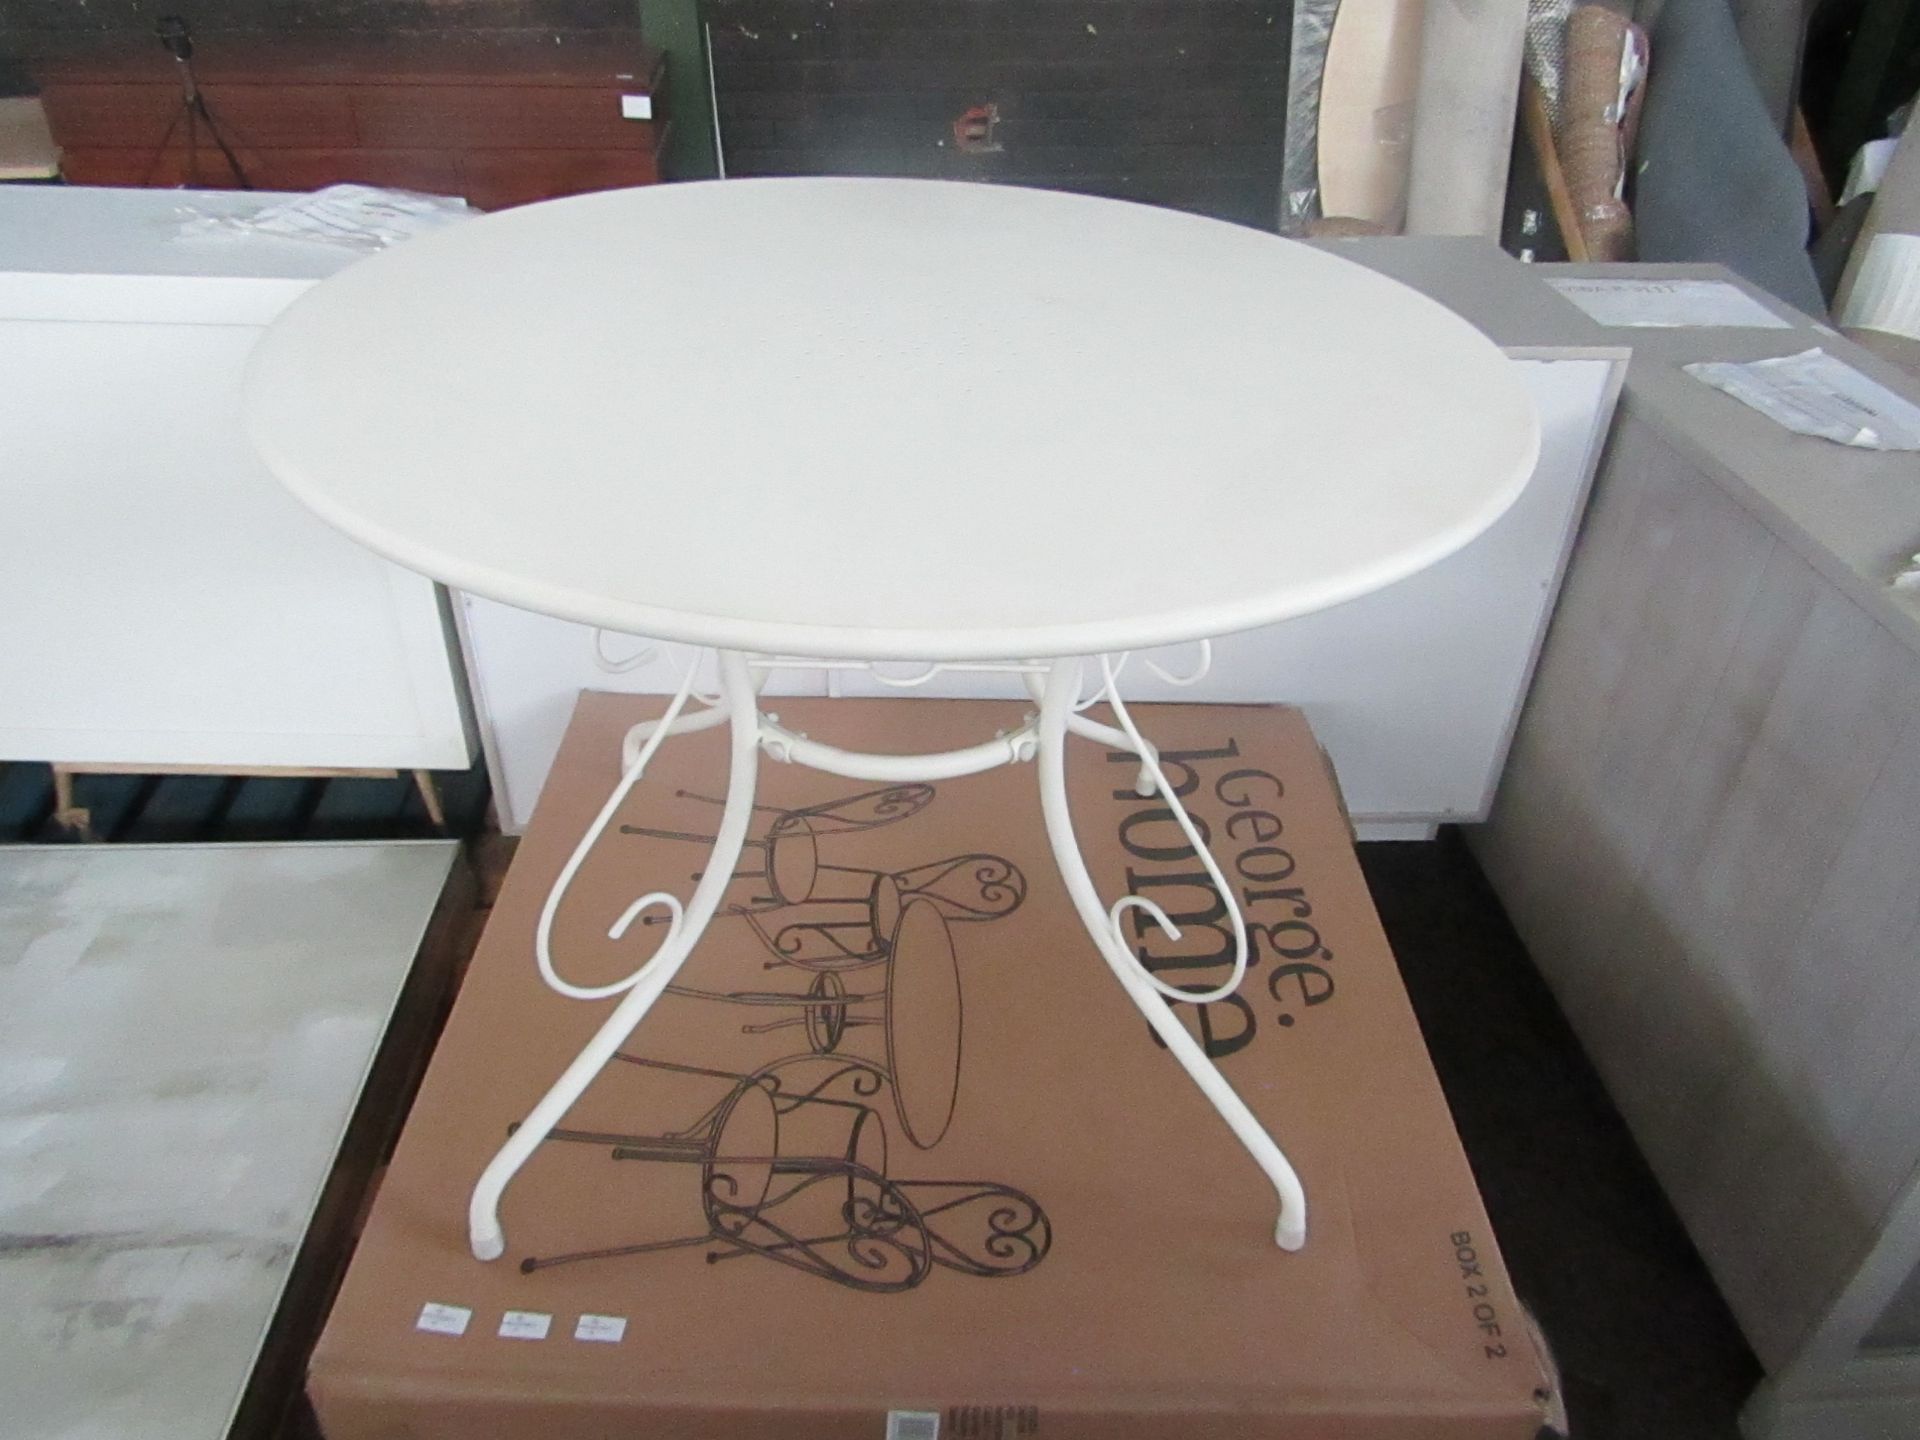 VAT 1x Outdoor Foldable Garden Table White, Good Condition & Boxed.